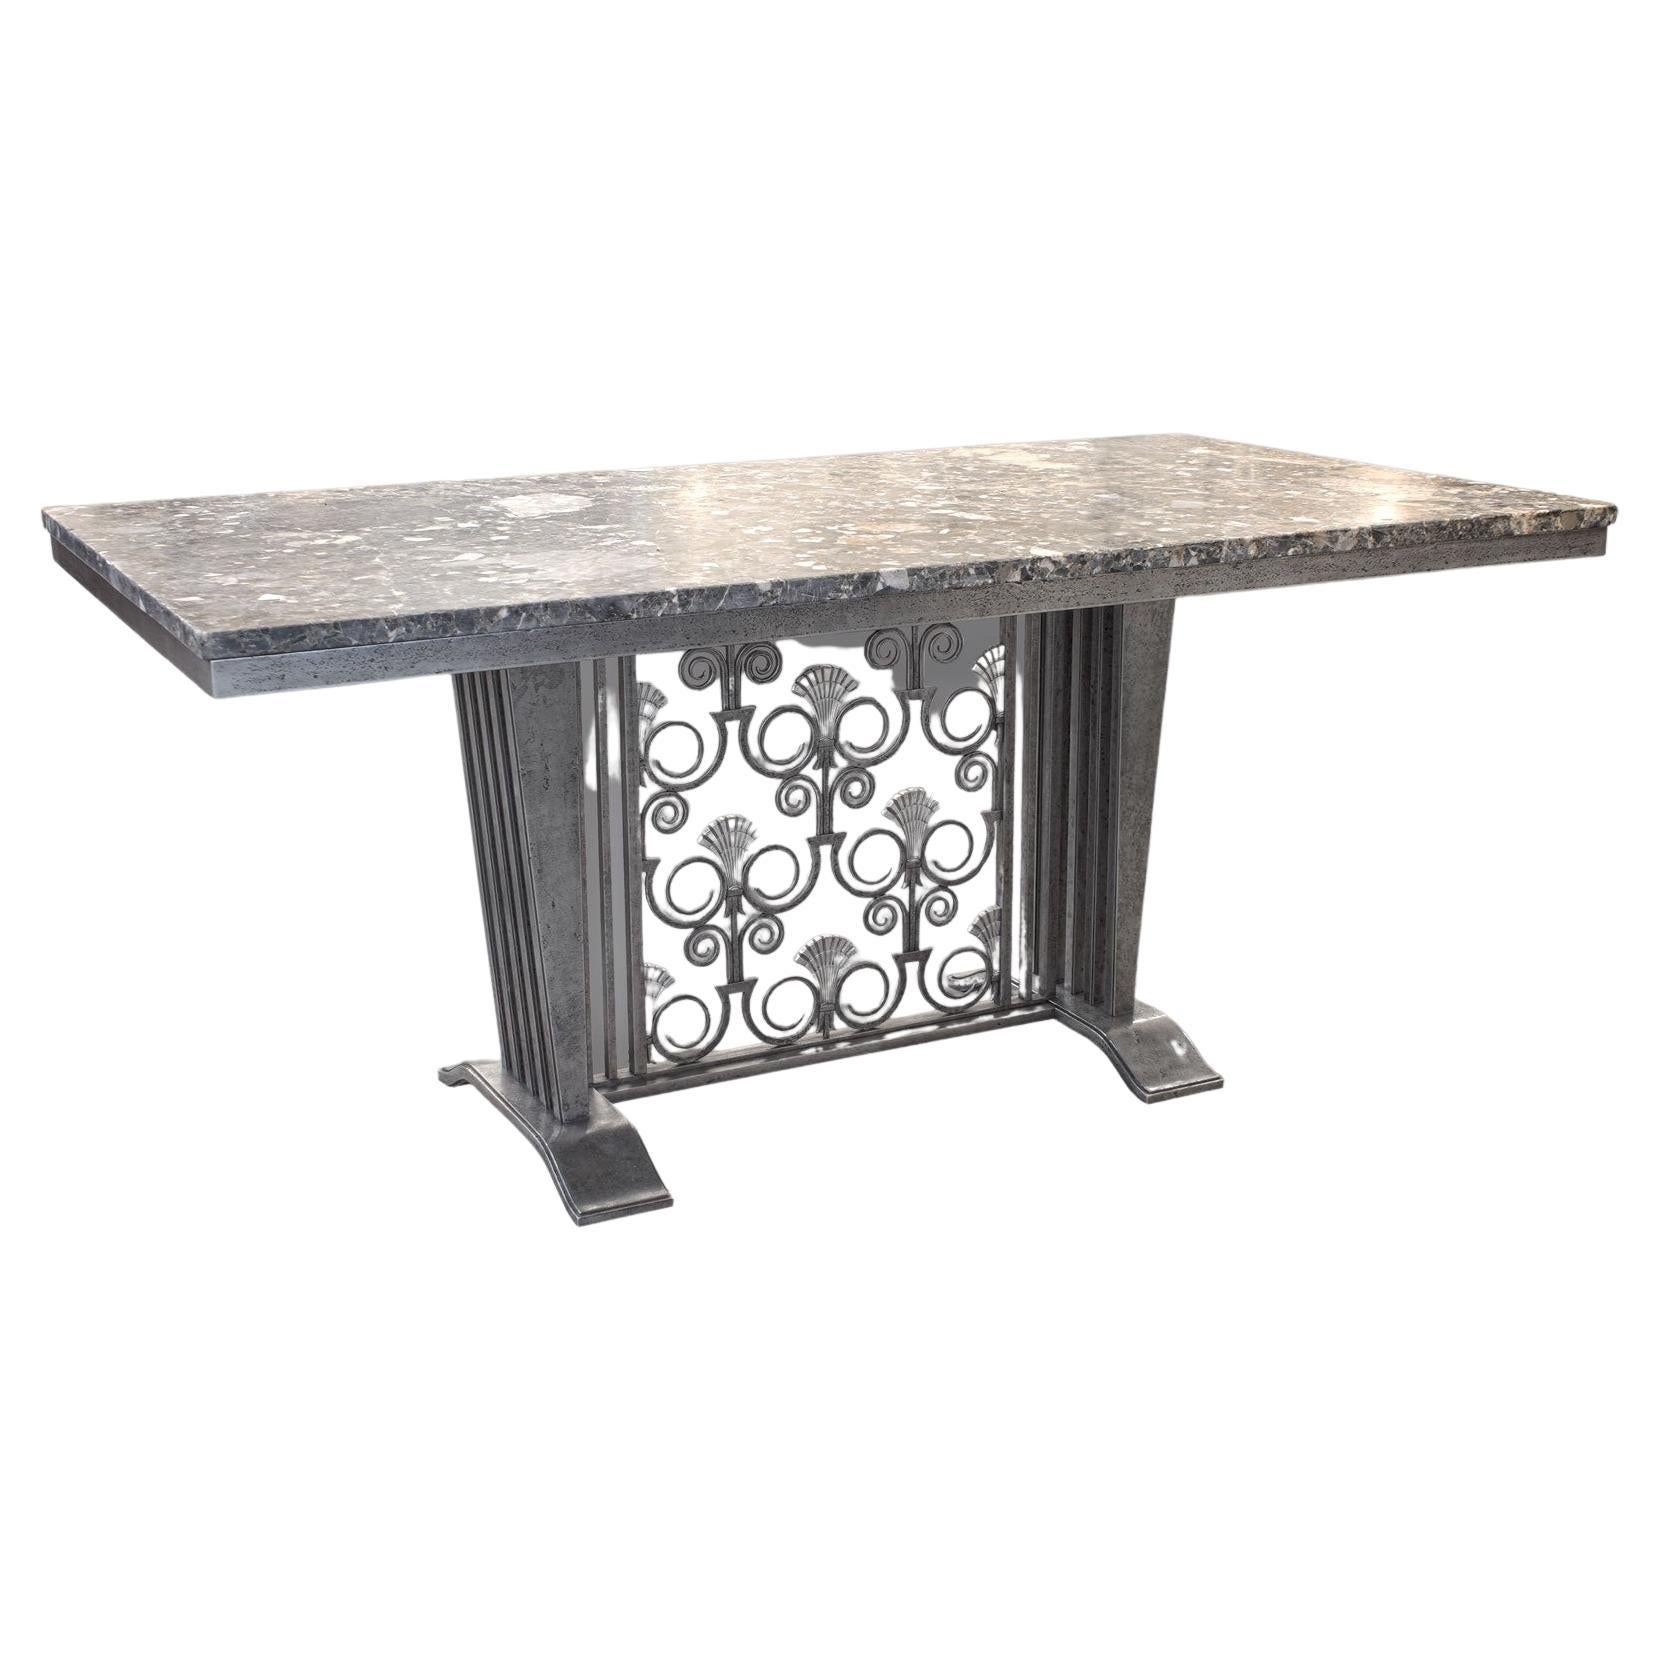 Edgar Brandt wrought iron and silvered bronze table with marble on the top 1930